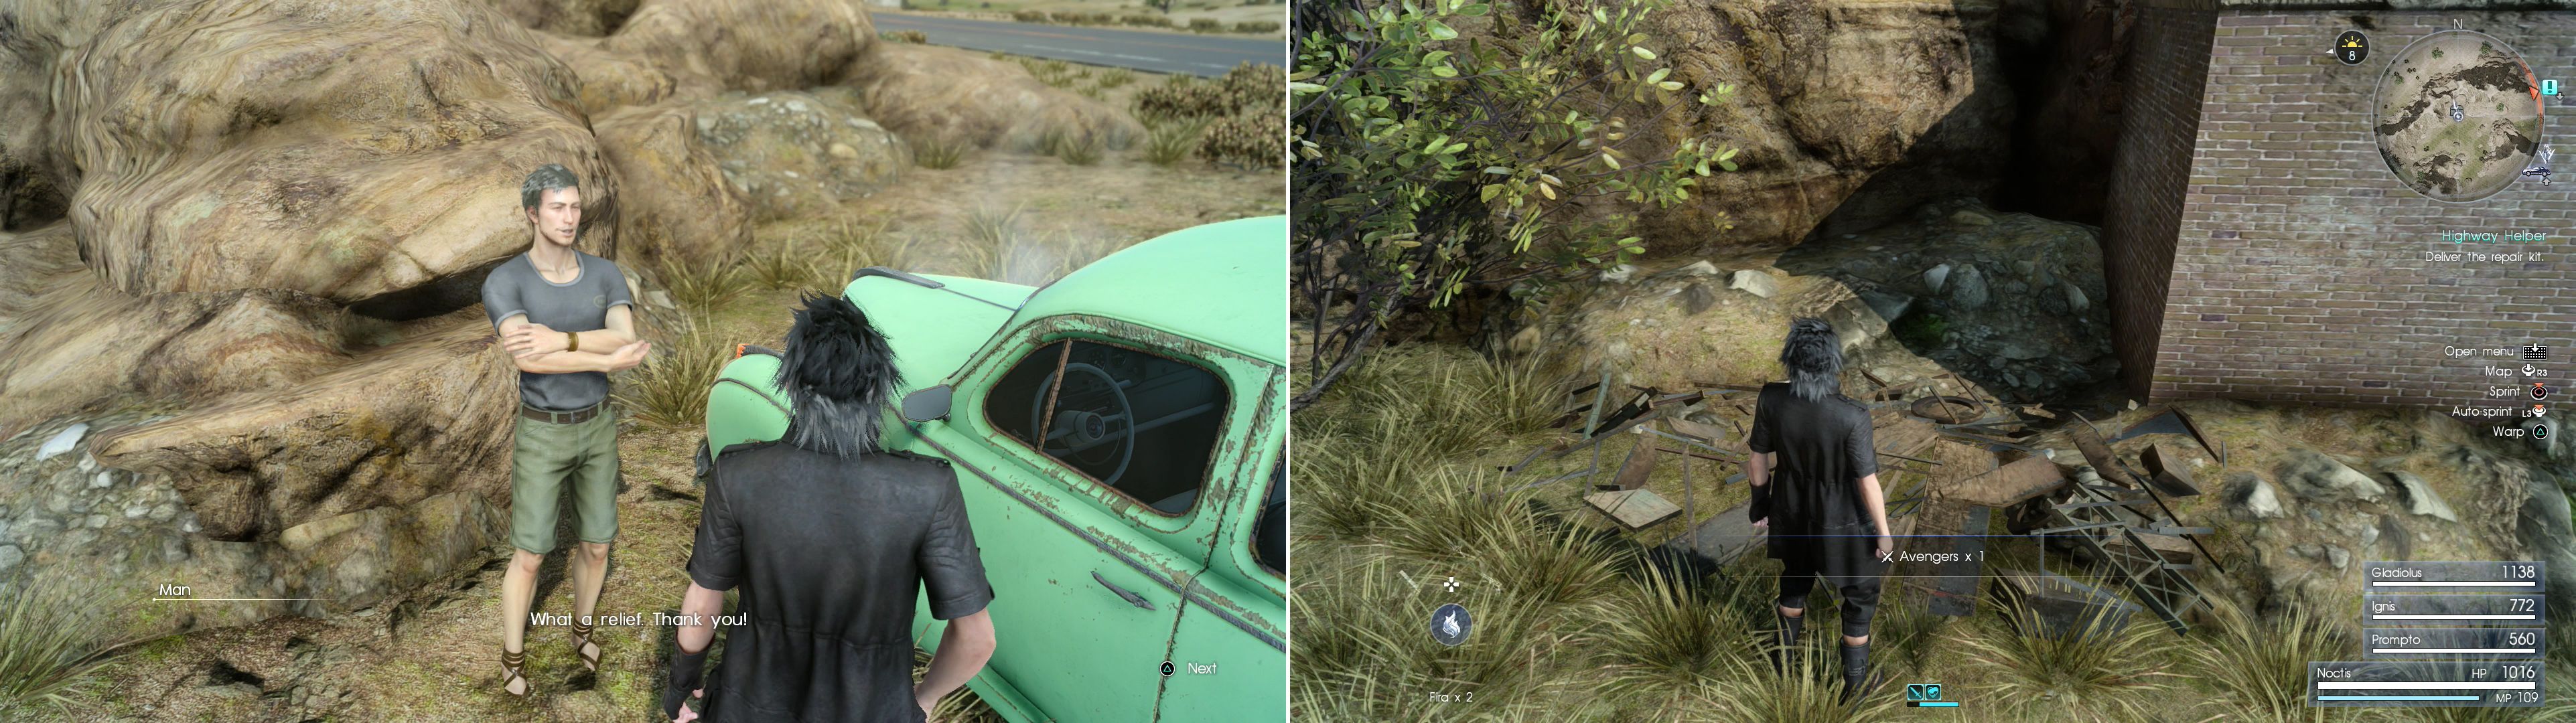 On your way back to the Hammerhead outpost, help a stranded motorist (left) and pick up some new daggers for Ignis (right).